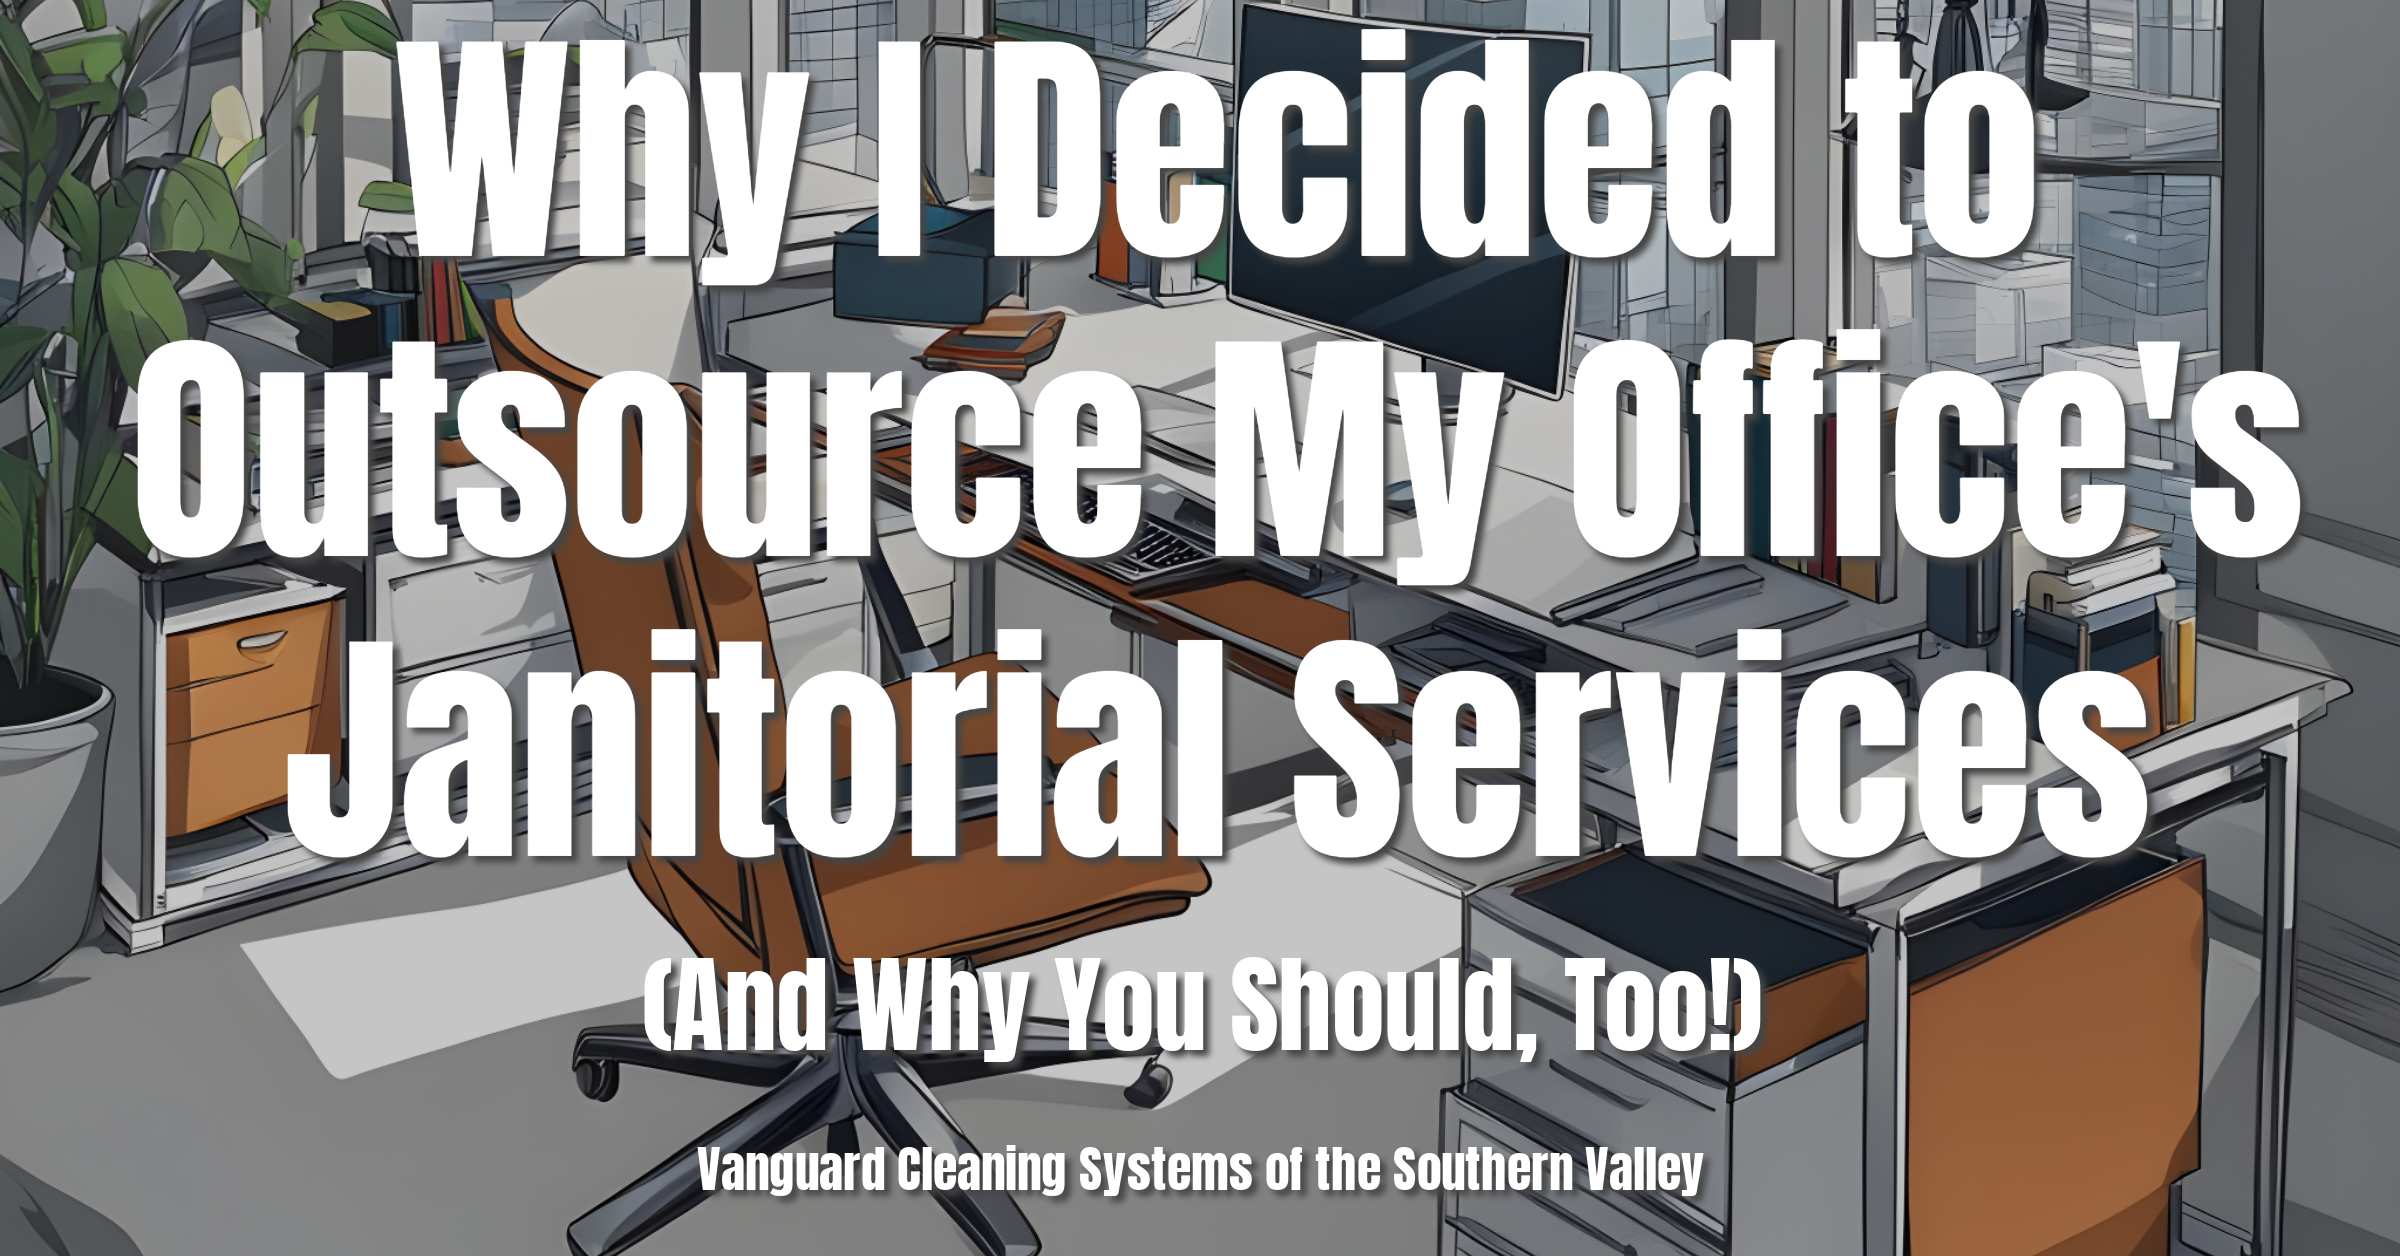 🌟 Why I Decided to Outsource My Office's Janitorial Services (And Why You Should, Too!)